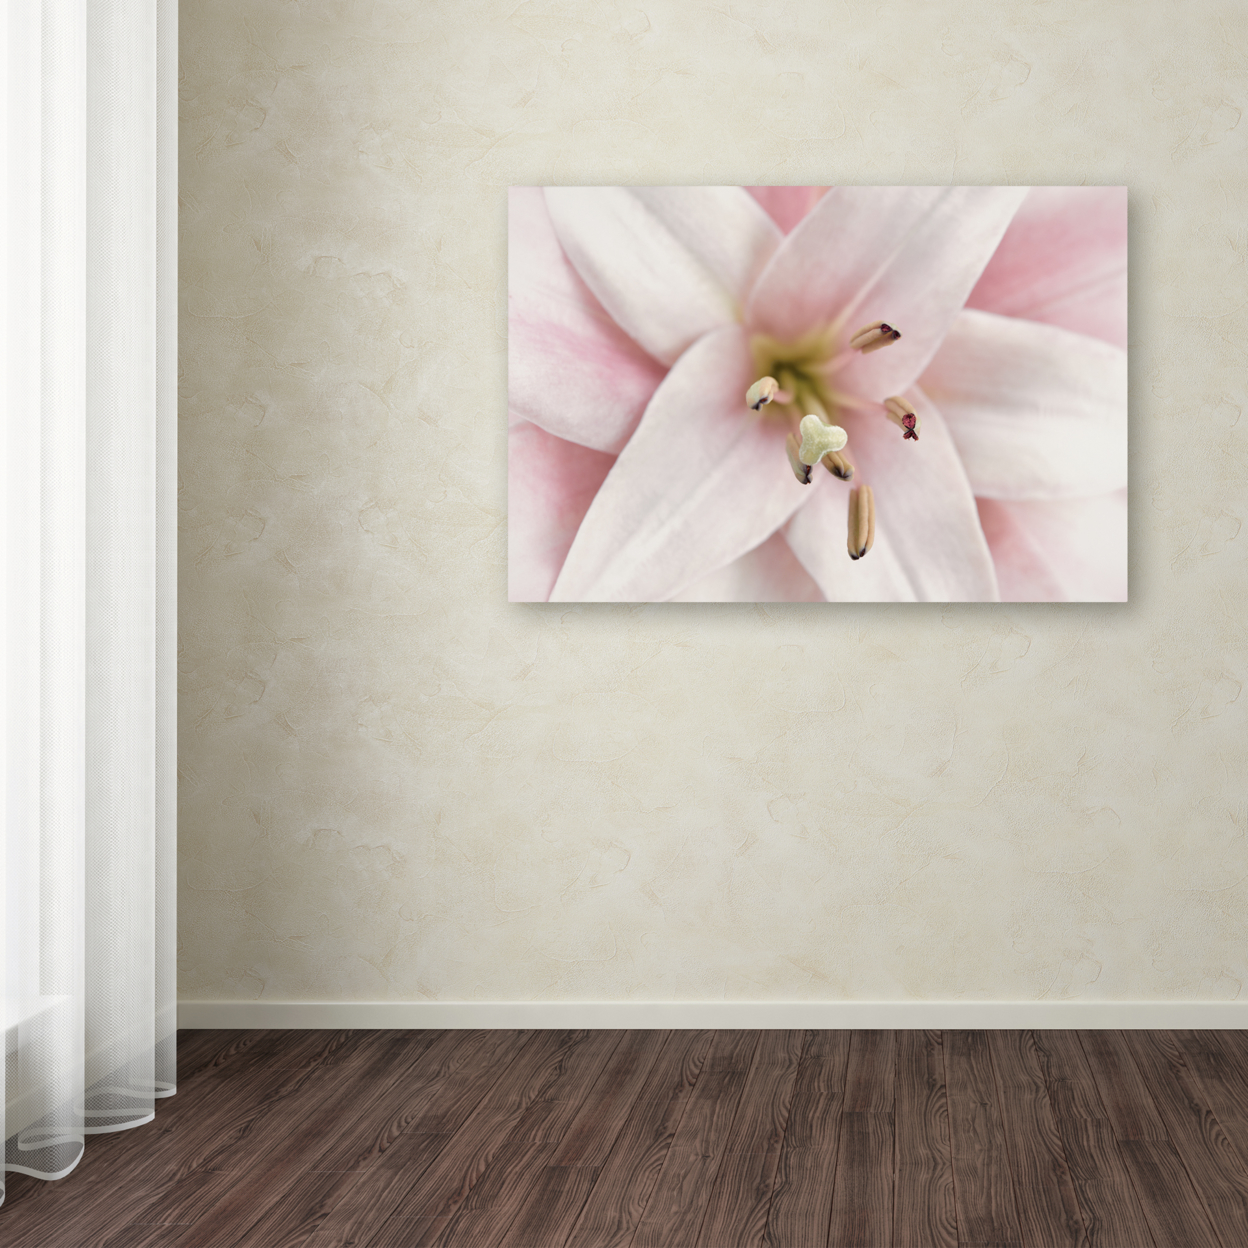 Cora Niele 'Pink Lily' Canvas Art 16 X 24